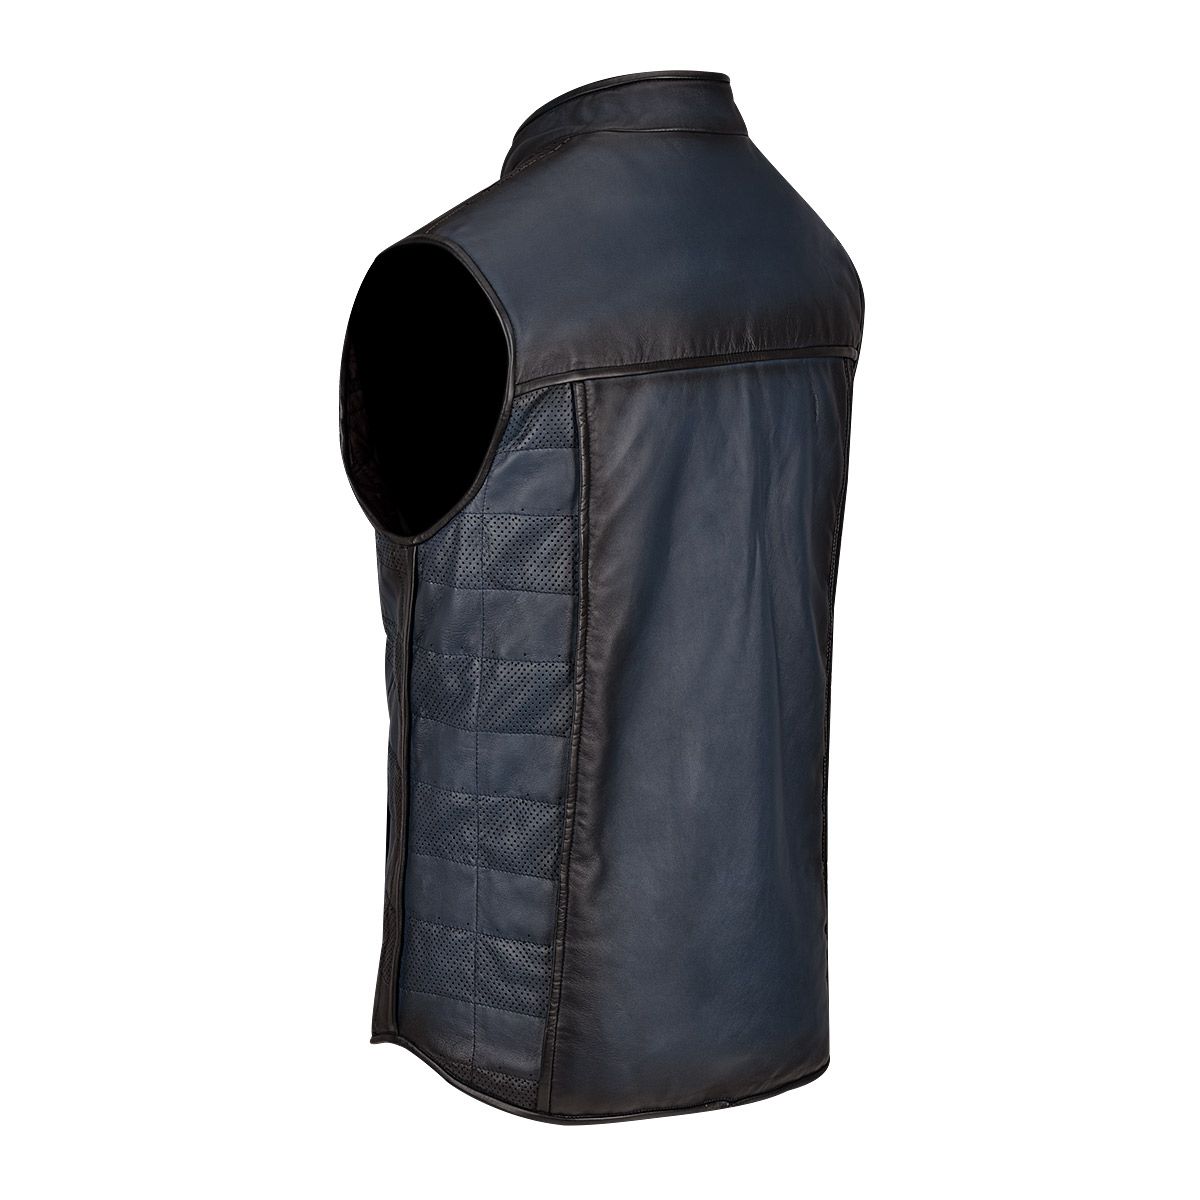 H303BOB - Cuadra blue casual fashion quilted cowhide leather racer vest for men-Kuet.us